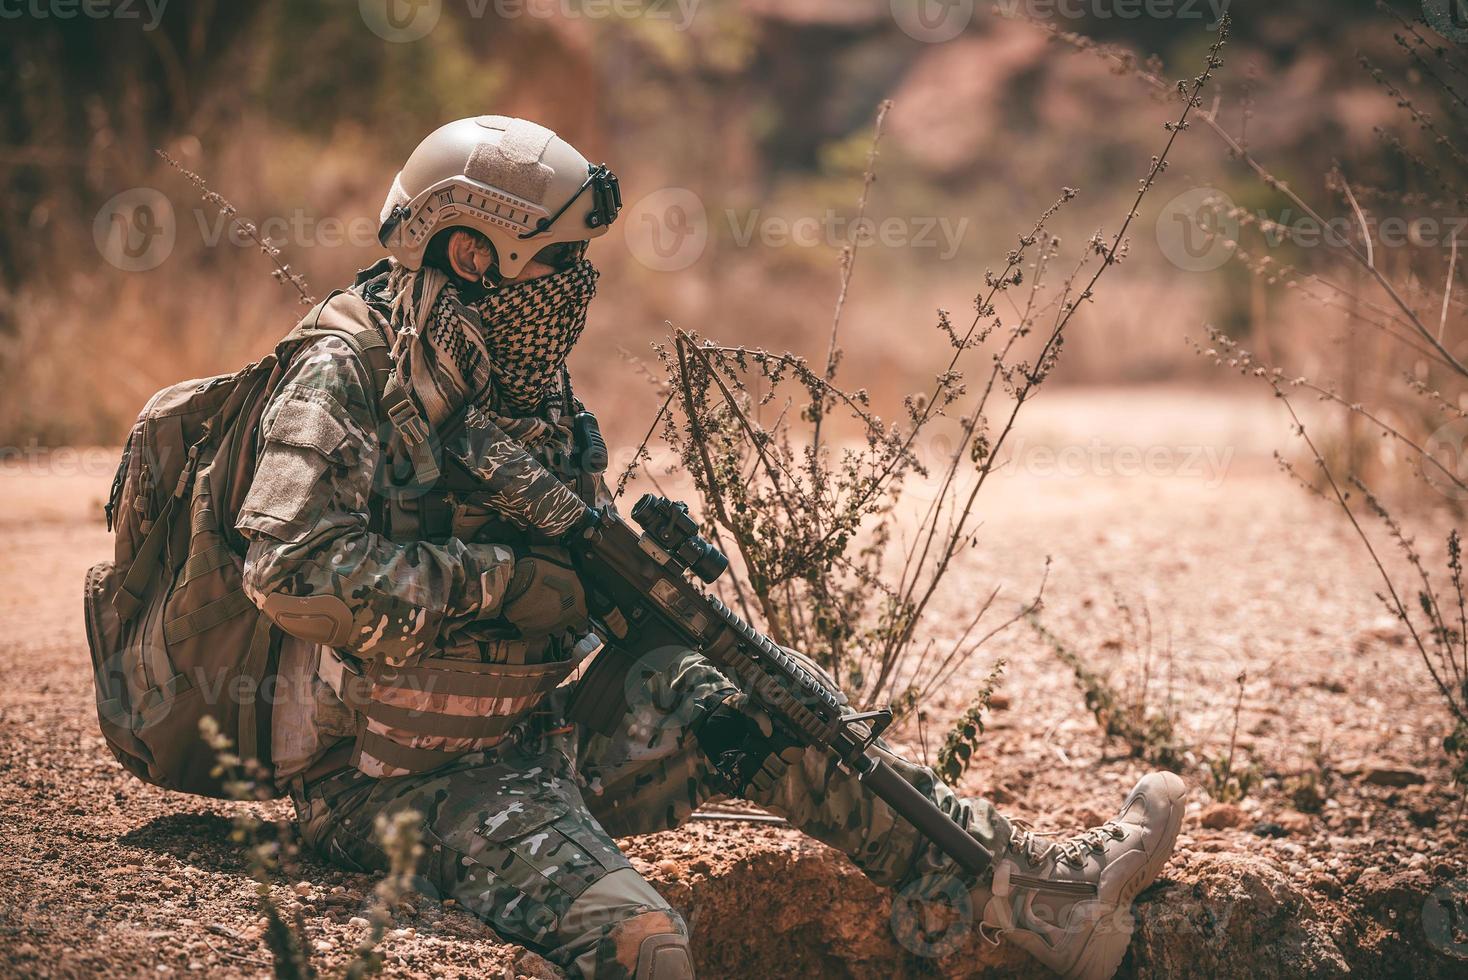 Soldiers of special forces on wars at the desert,Thailand people,Army soldier photo